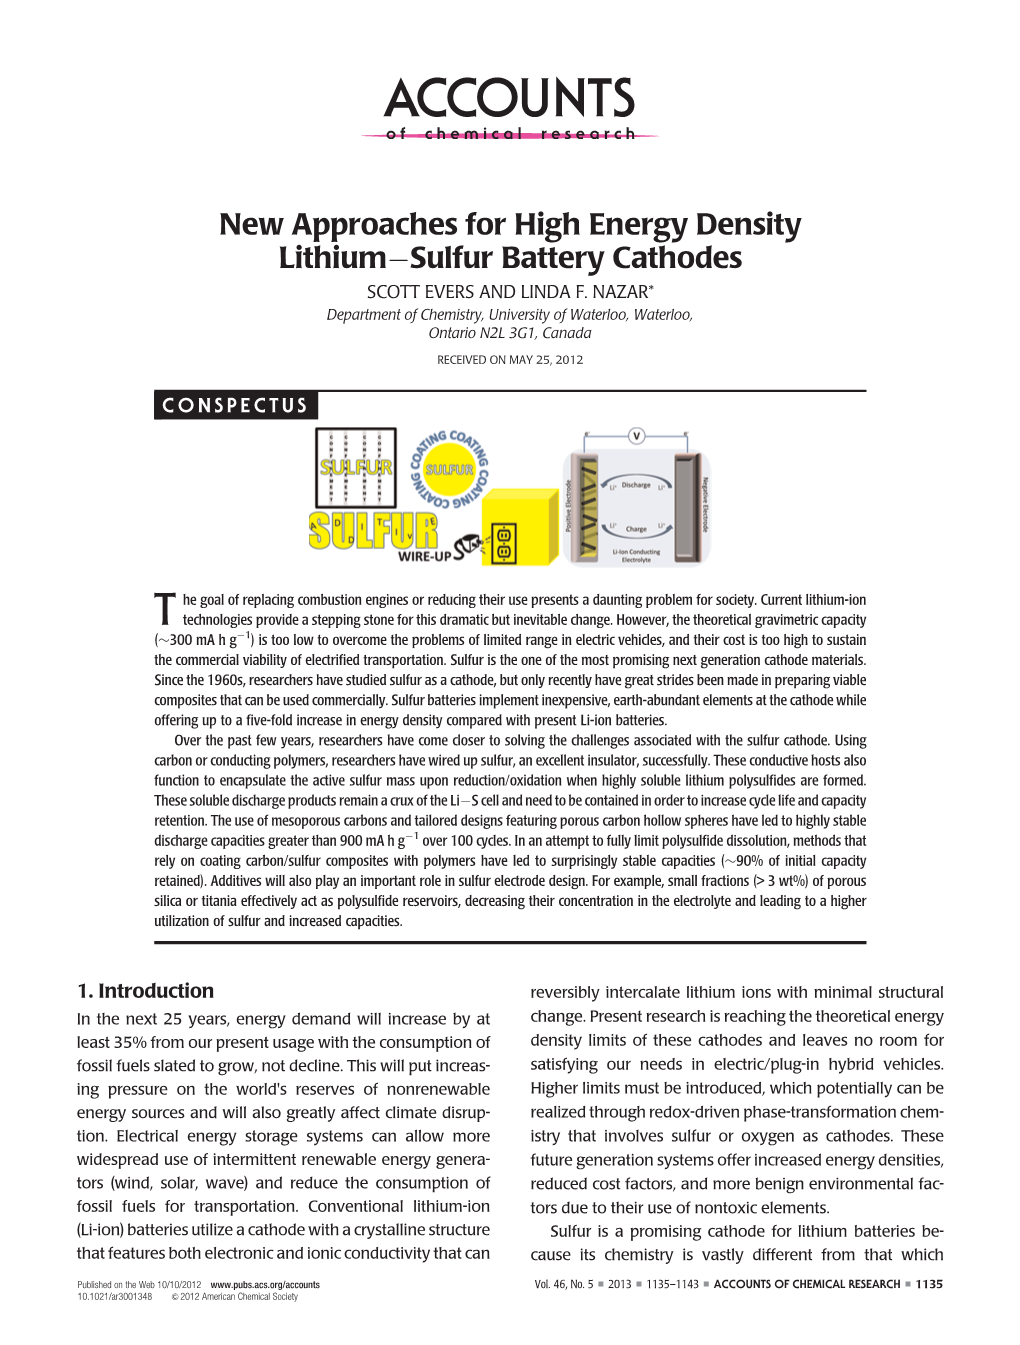 New Approaches for High Energy Density Lithium–Sulfur Battery